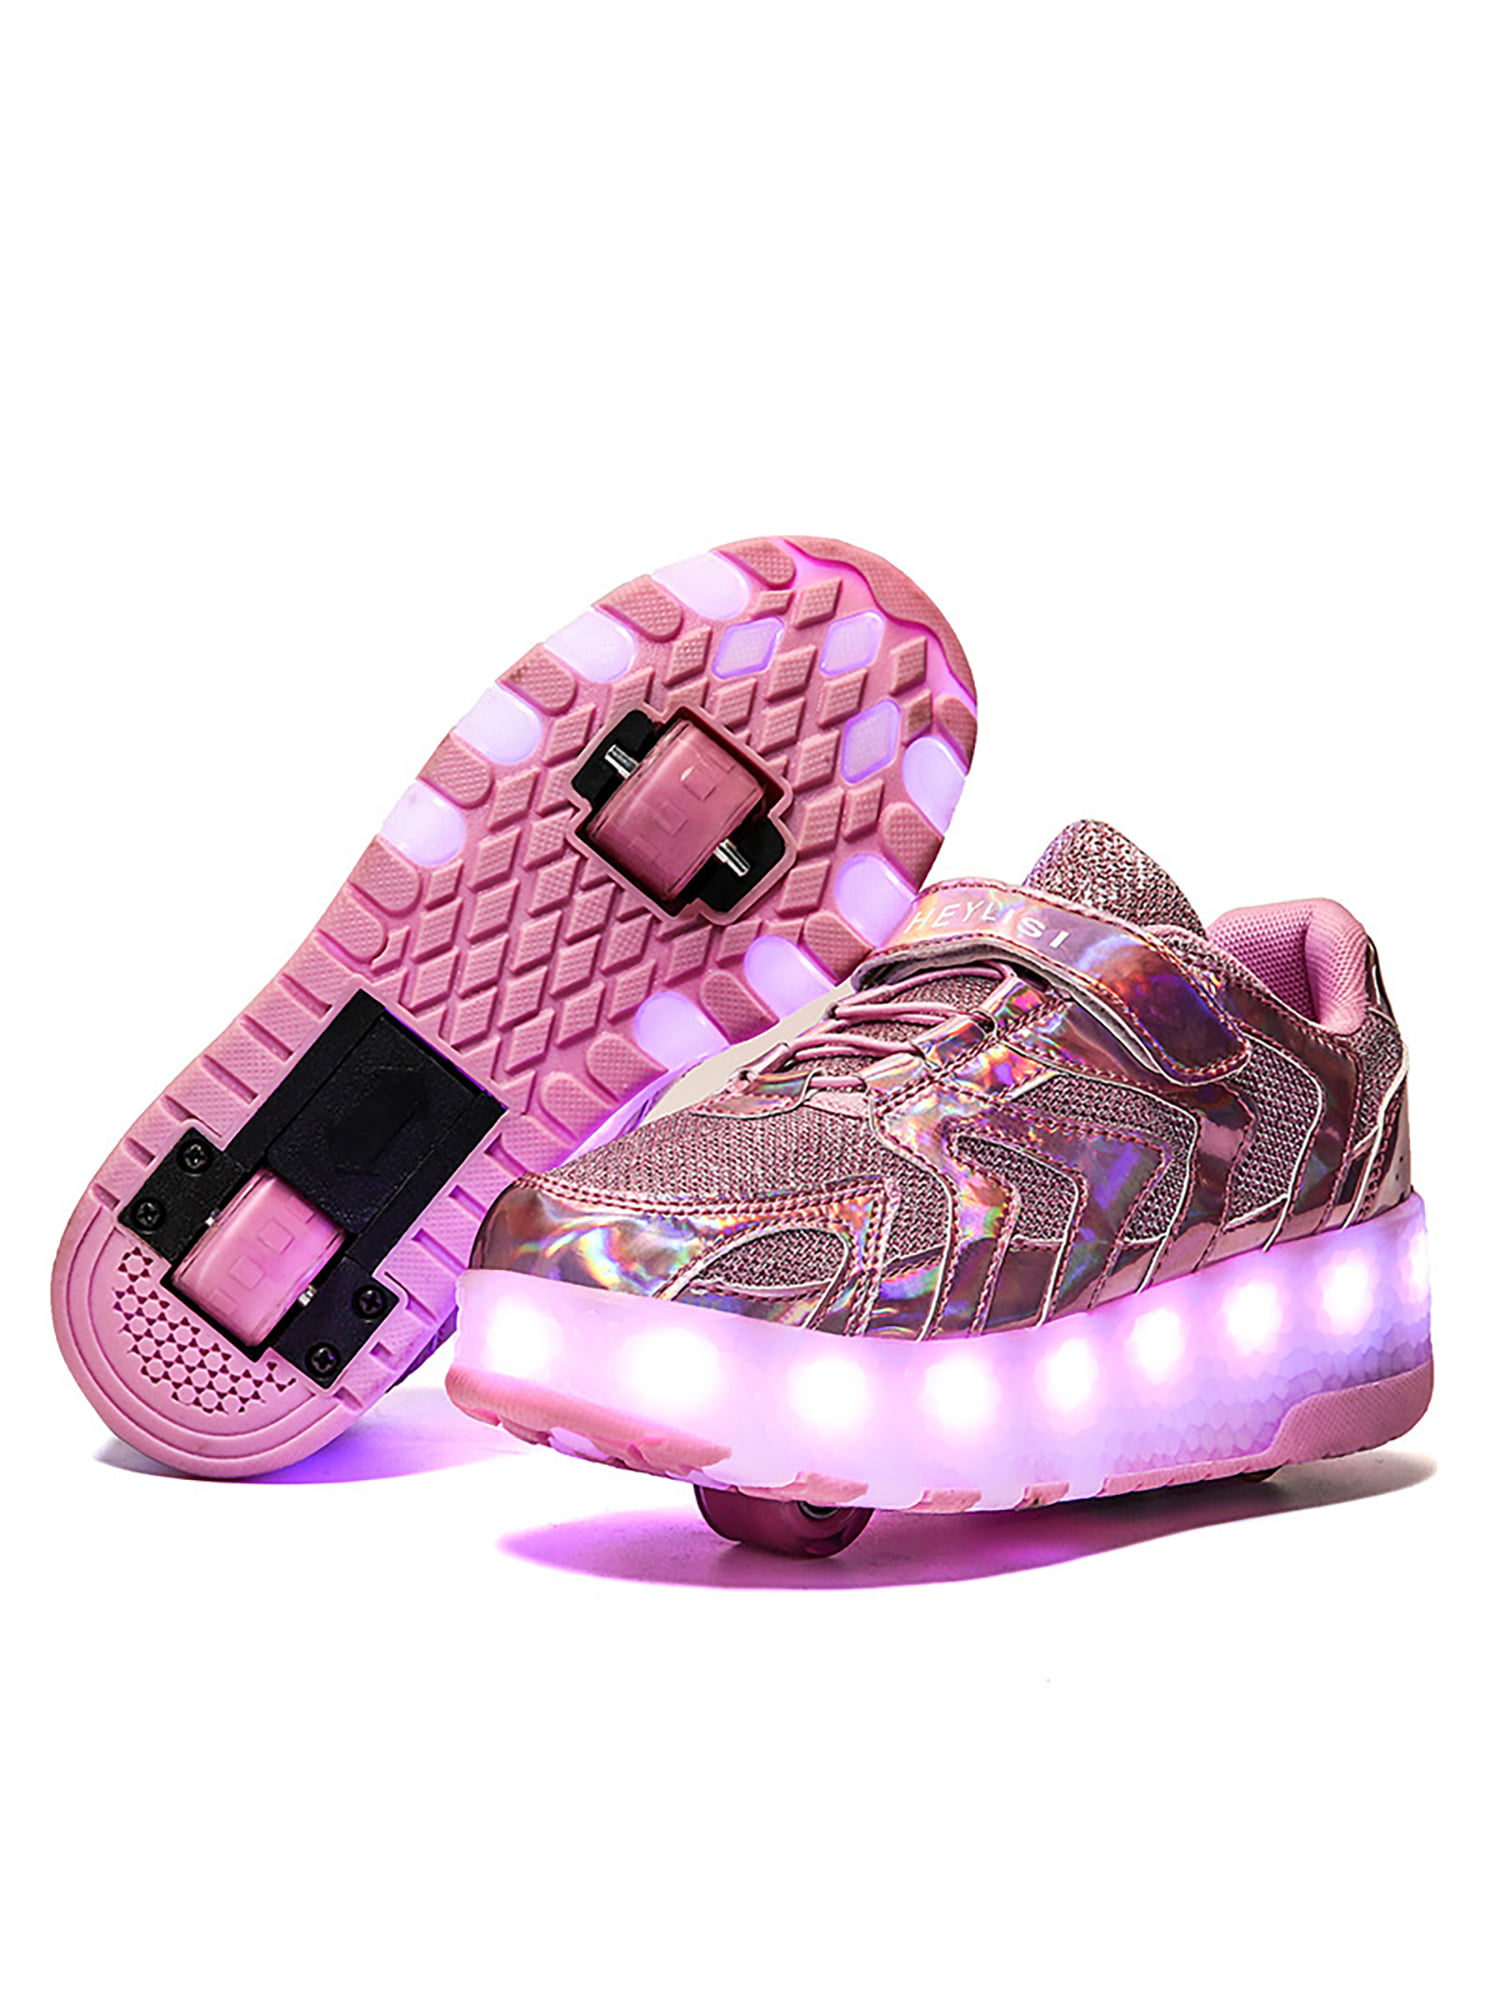 Girl's Light Up LED Shoes For Baby Toddler And Youth Kids Athletic Sneakers 